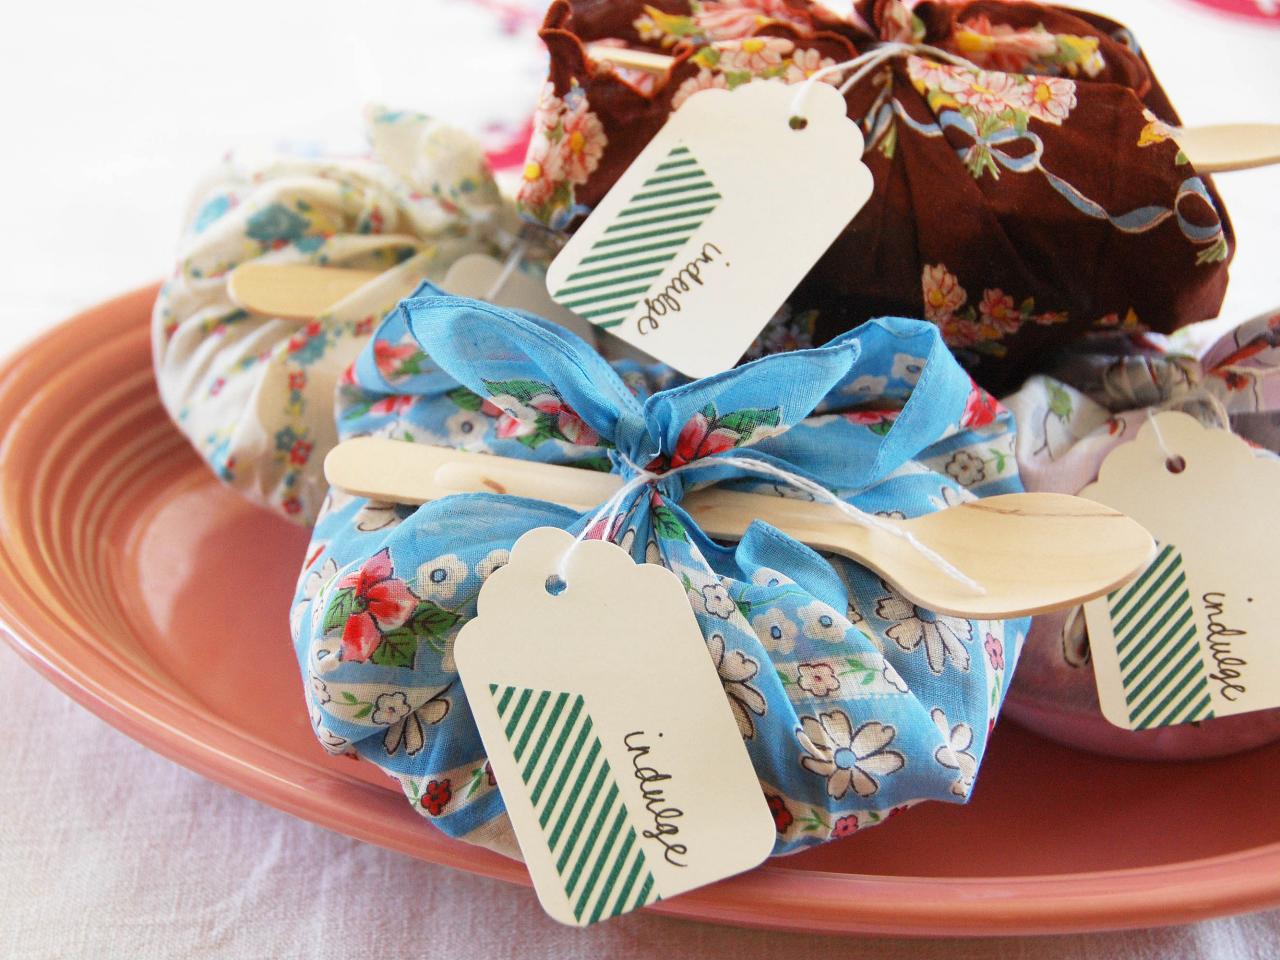 Ideas for Easy, Cheap DIY Party Favors